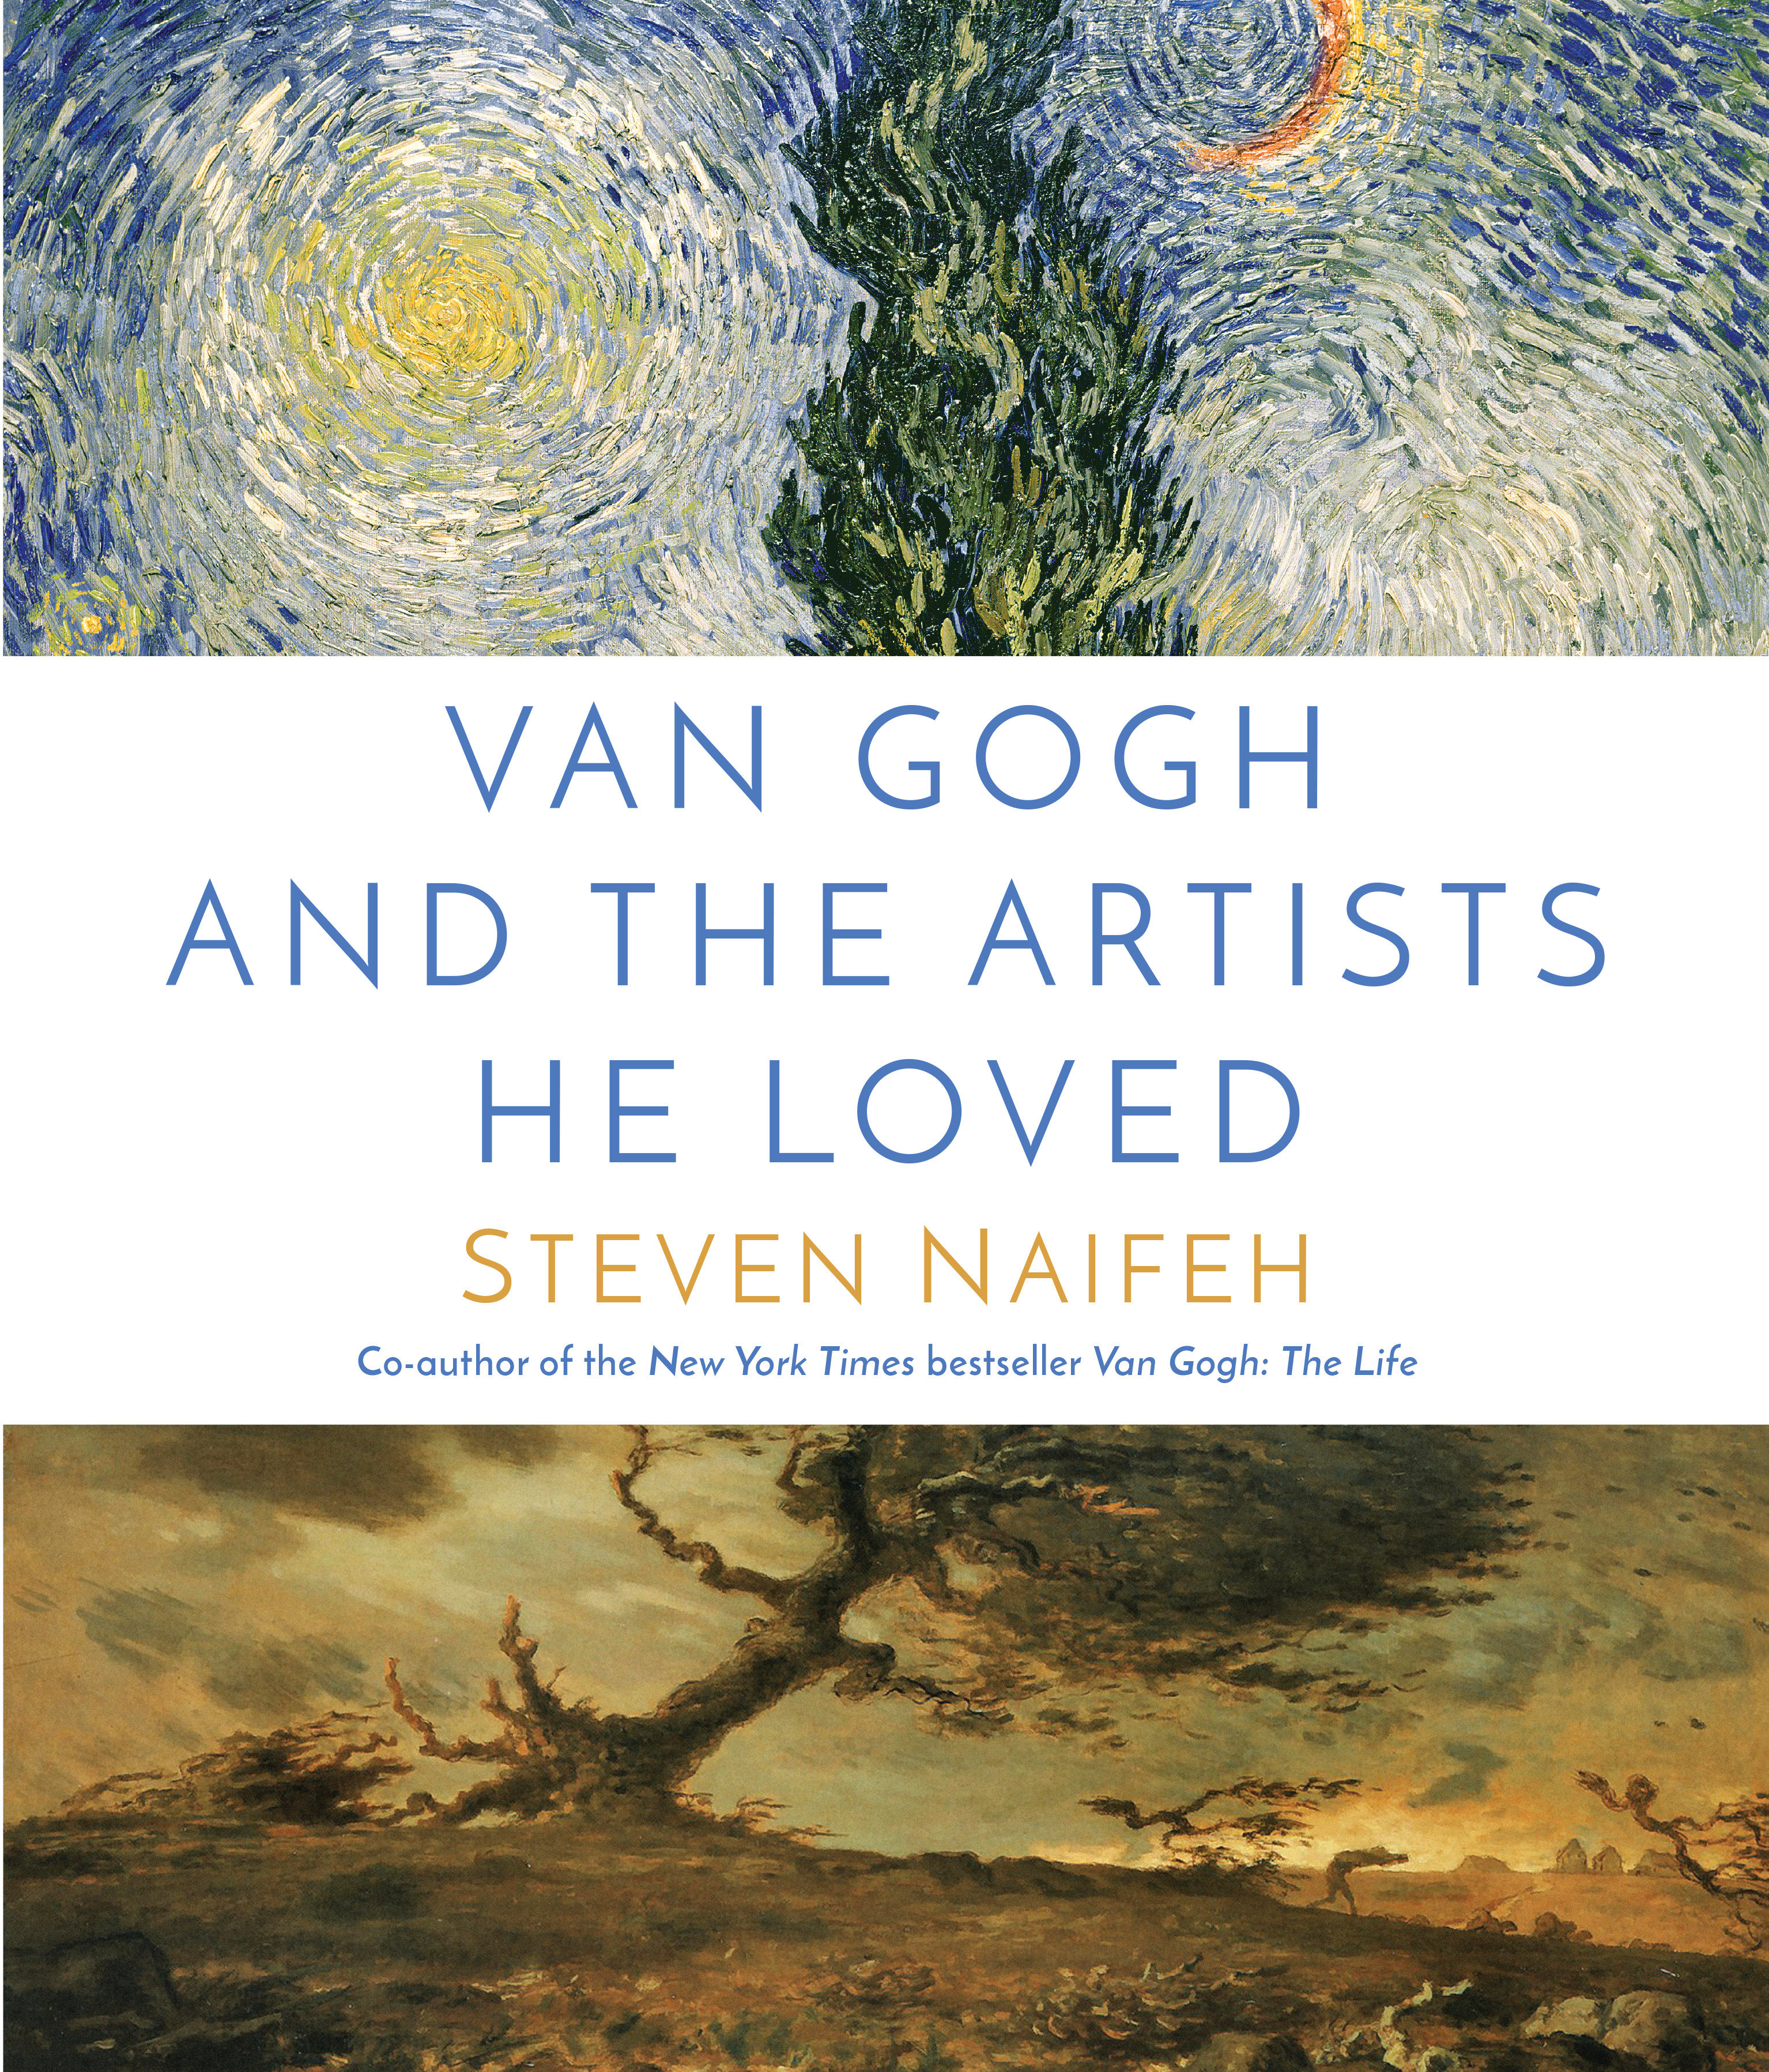 Van Gogh and the Artists He Loved (Hardcover Book)